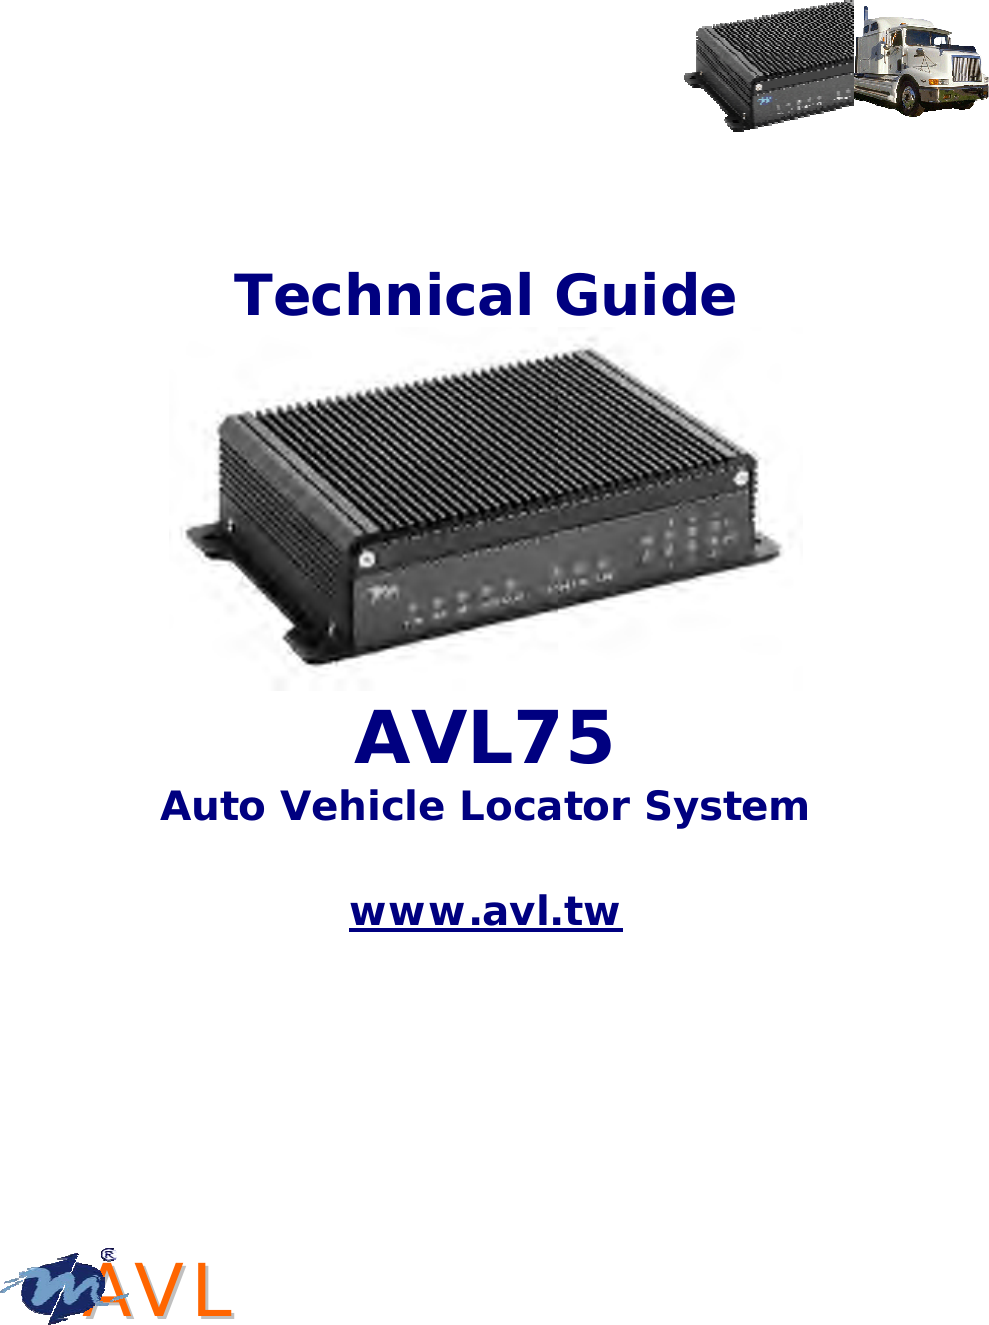      Technical Guide  AVL75 Auto Vehicle Locator System   www.avl.tw  AAVVLL  